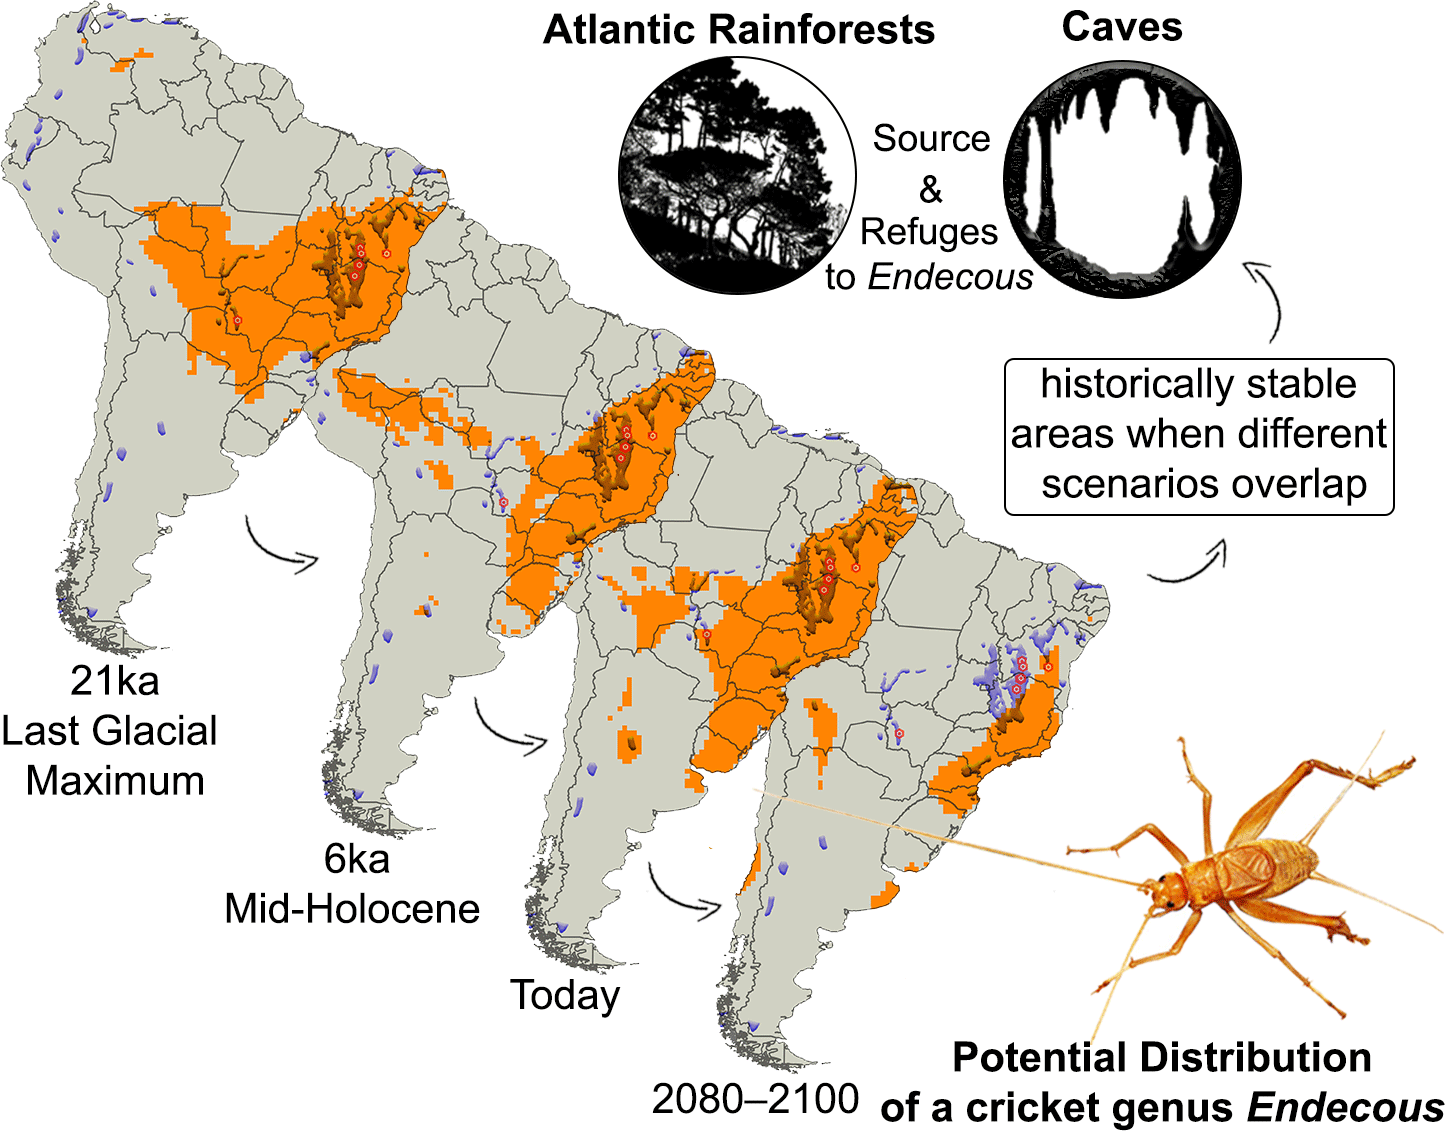 Persisting while changing over time modelling the historical biogeographic of cave crickets (Orthoptera, Grylloidea) in Neotropics Journal of Tropical Ecology Cambridge Core